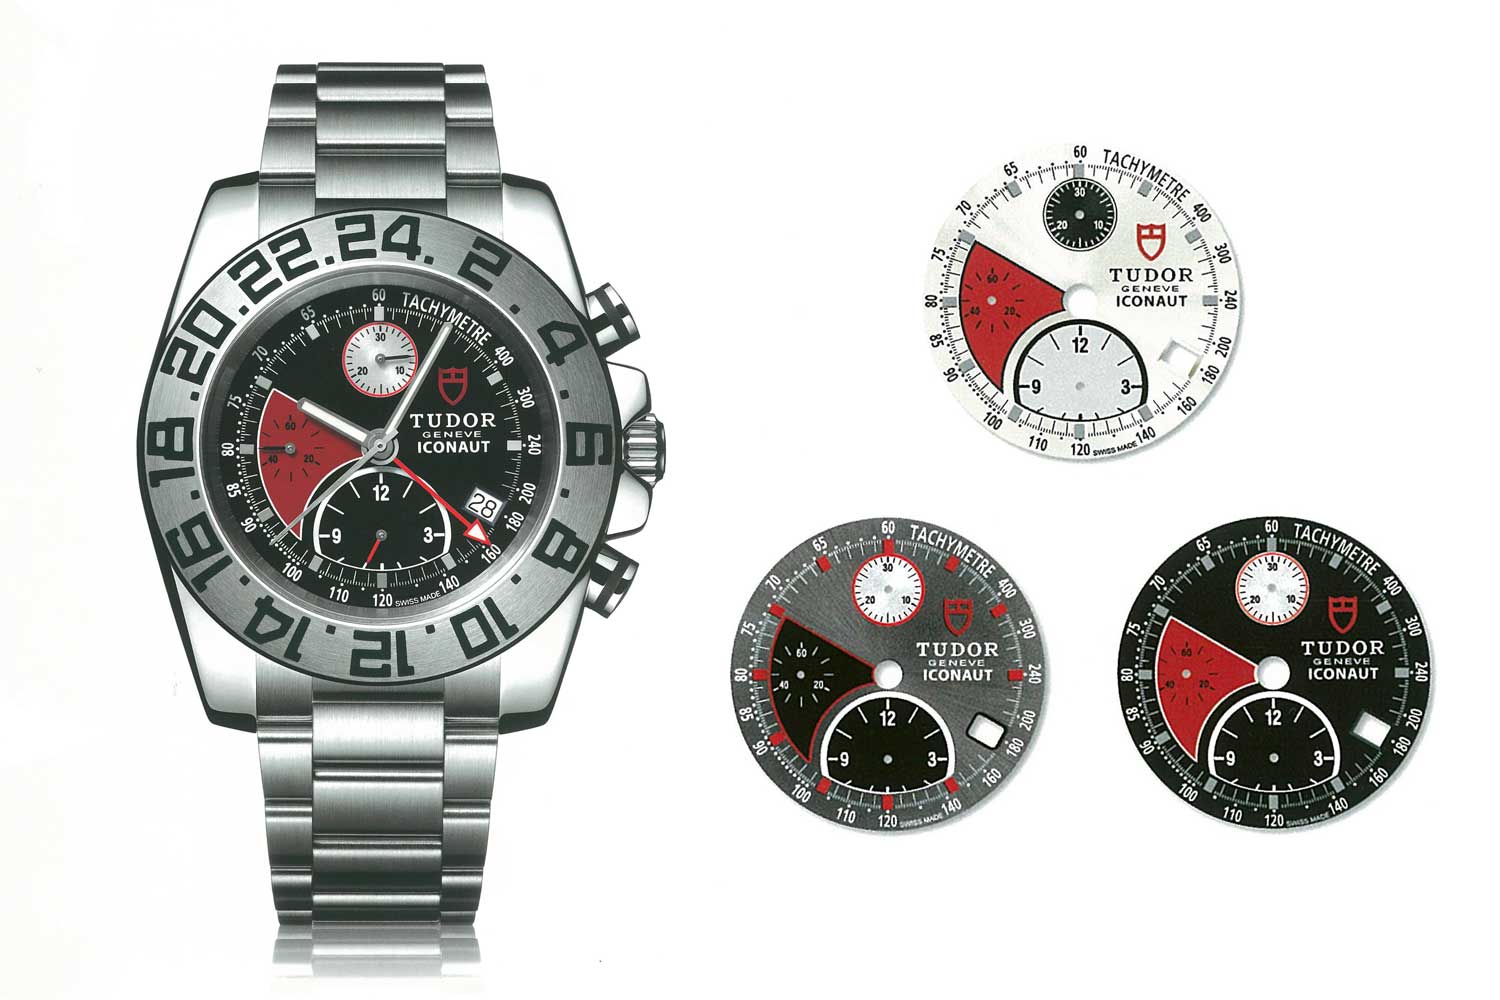 The 43mm Iconaut with shark fin “Deco” dial was Tudor’s first GMT model